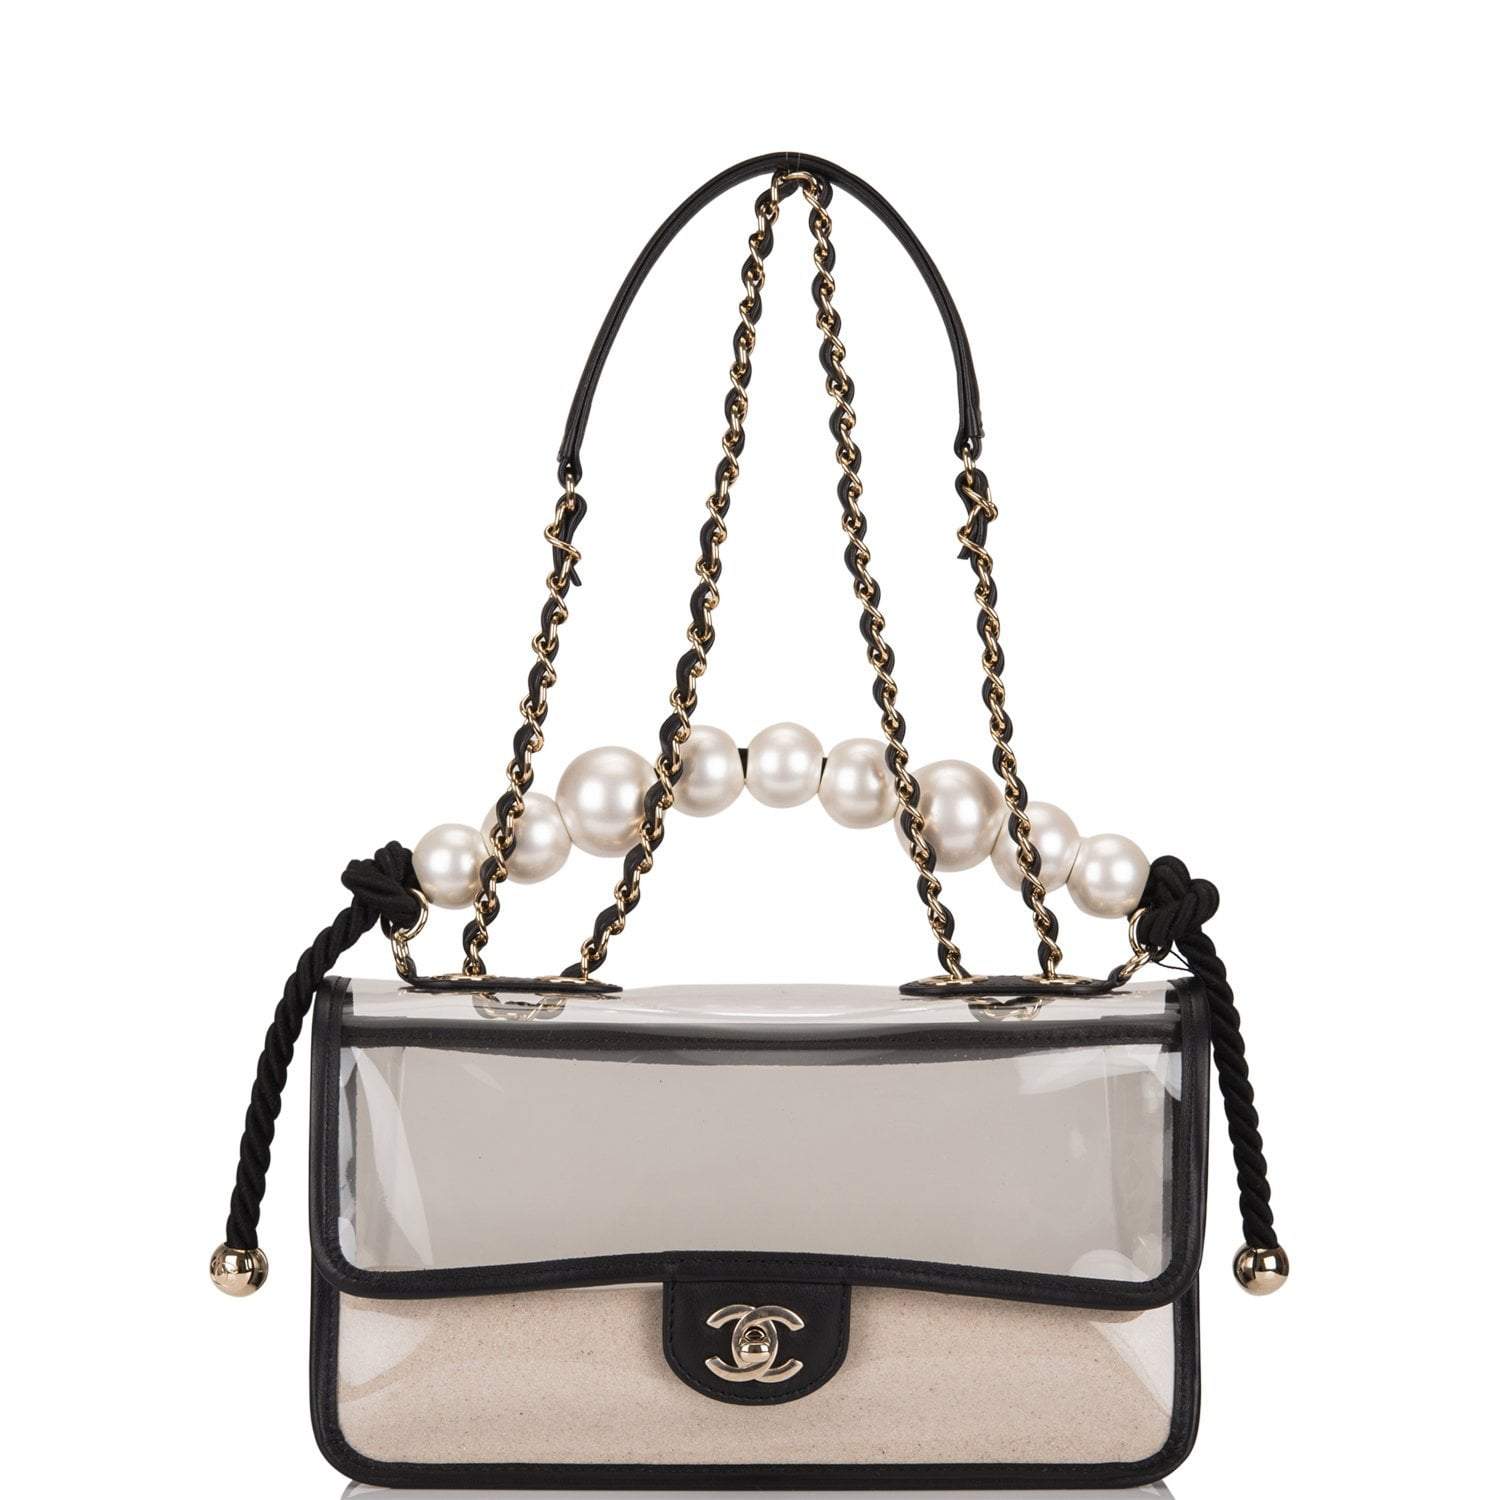 Chanel Bags with Pearls From SpringSummer 2019  Spotted Fashion